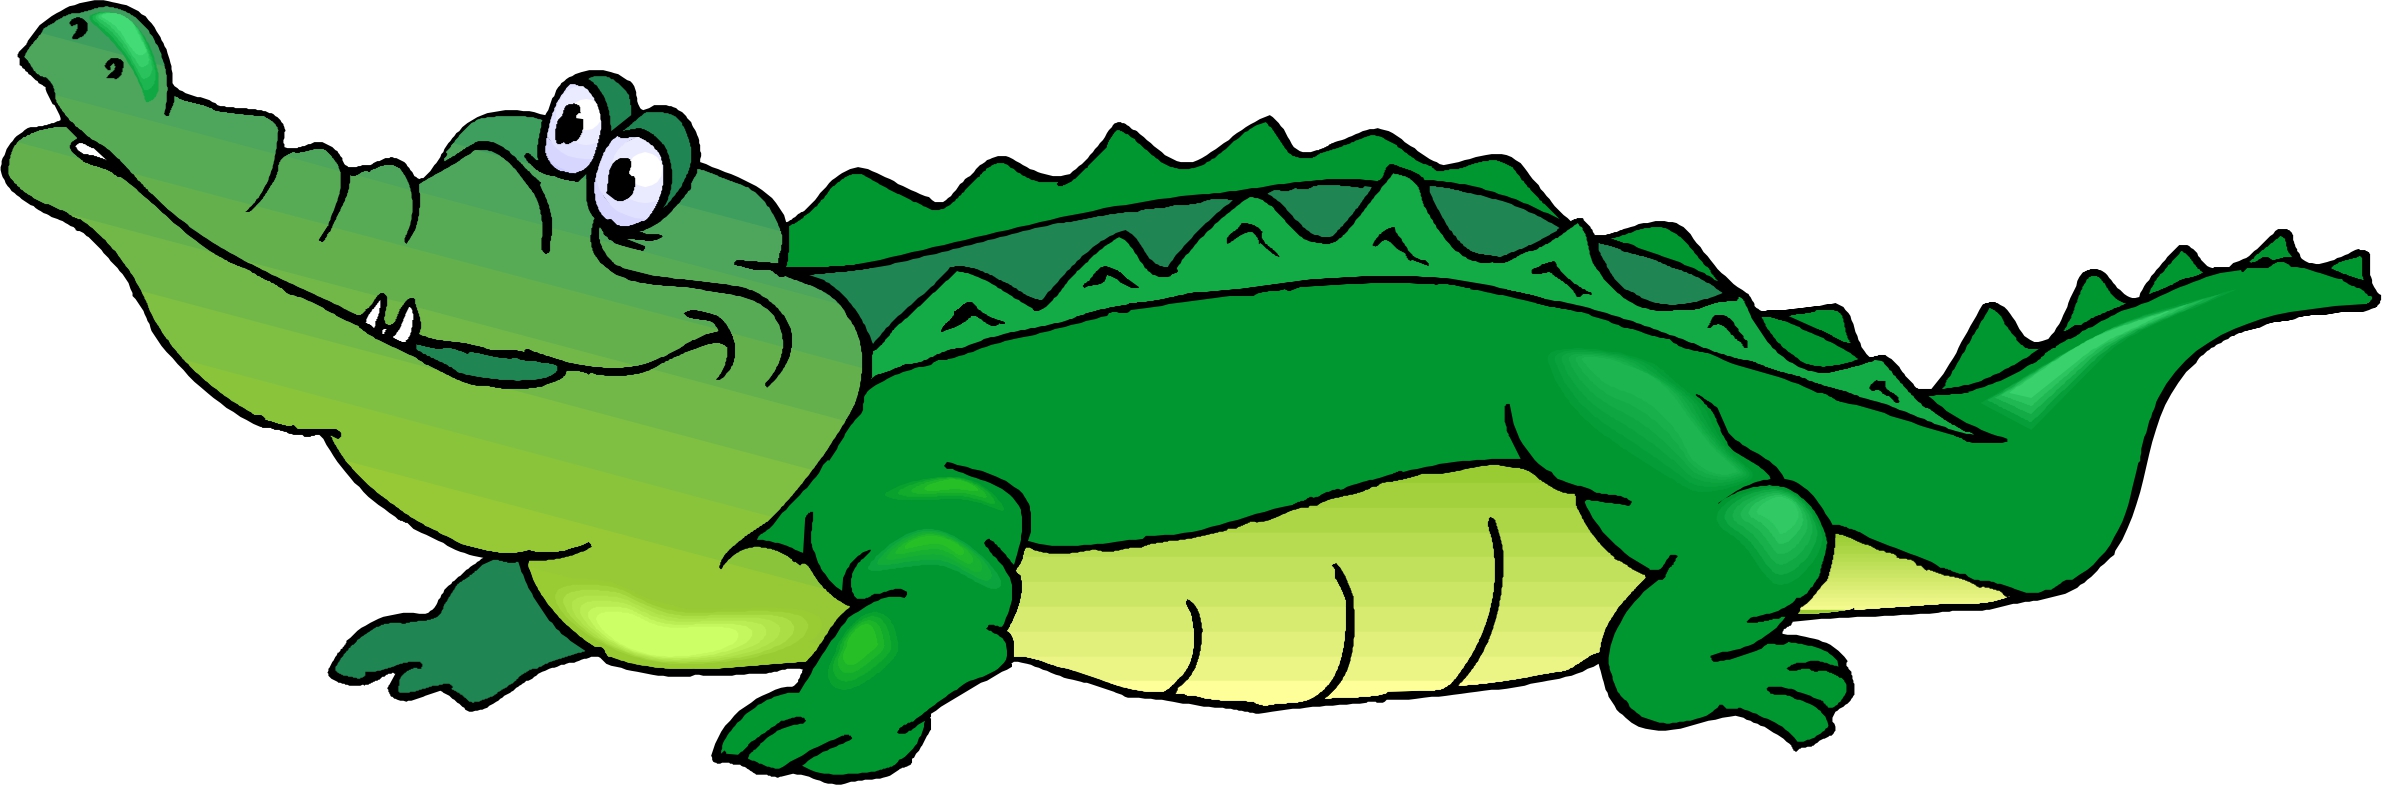 Crocodile clipart clipart for you